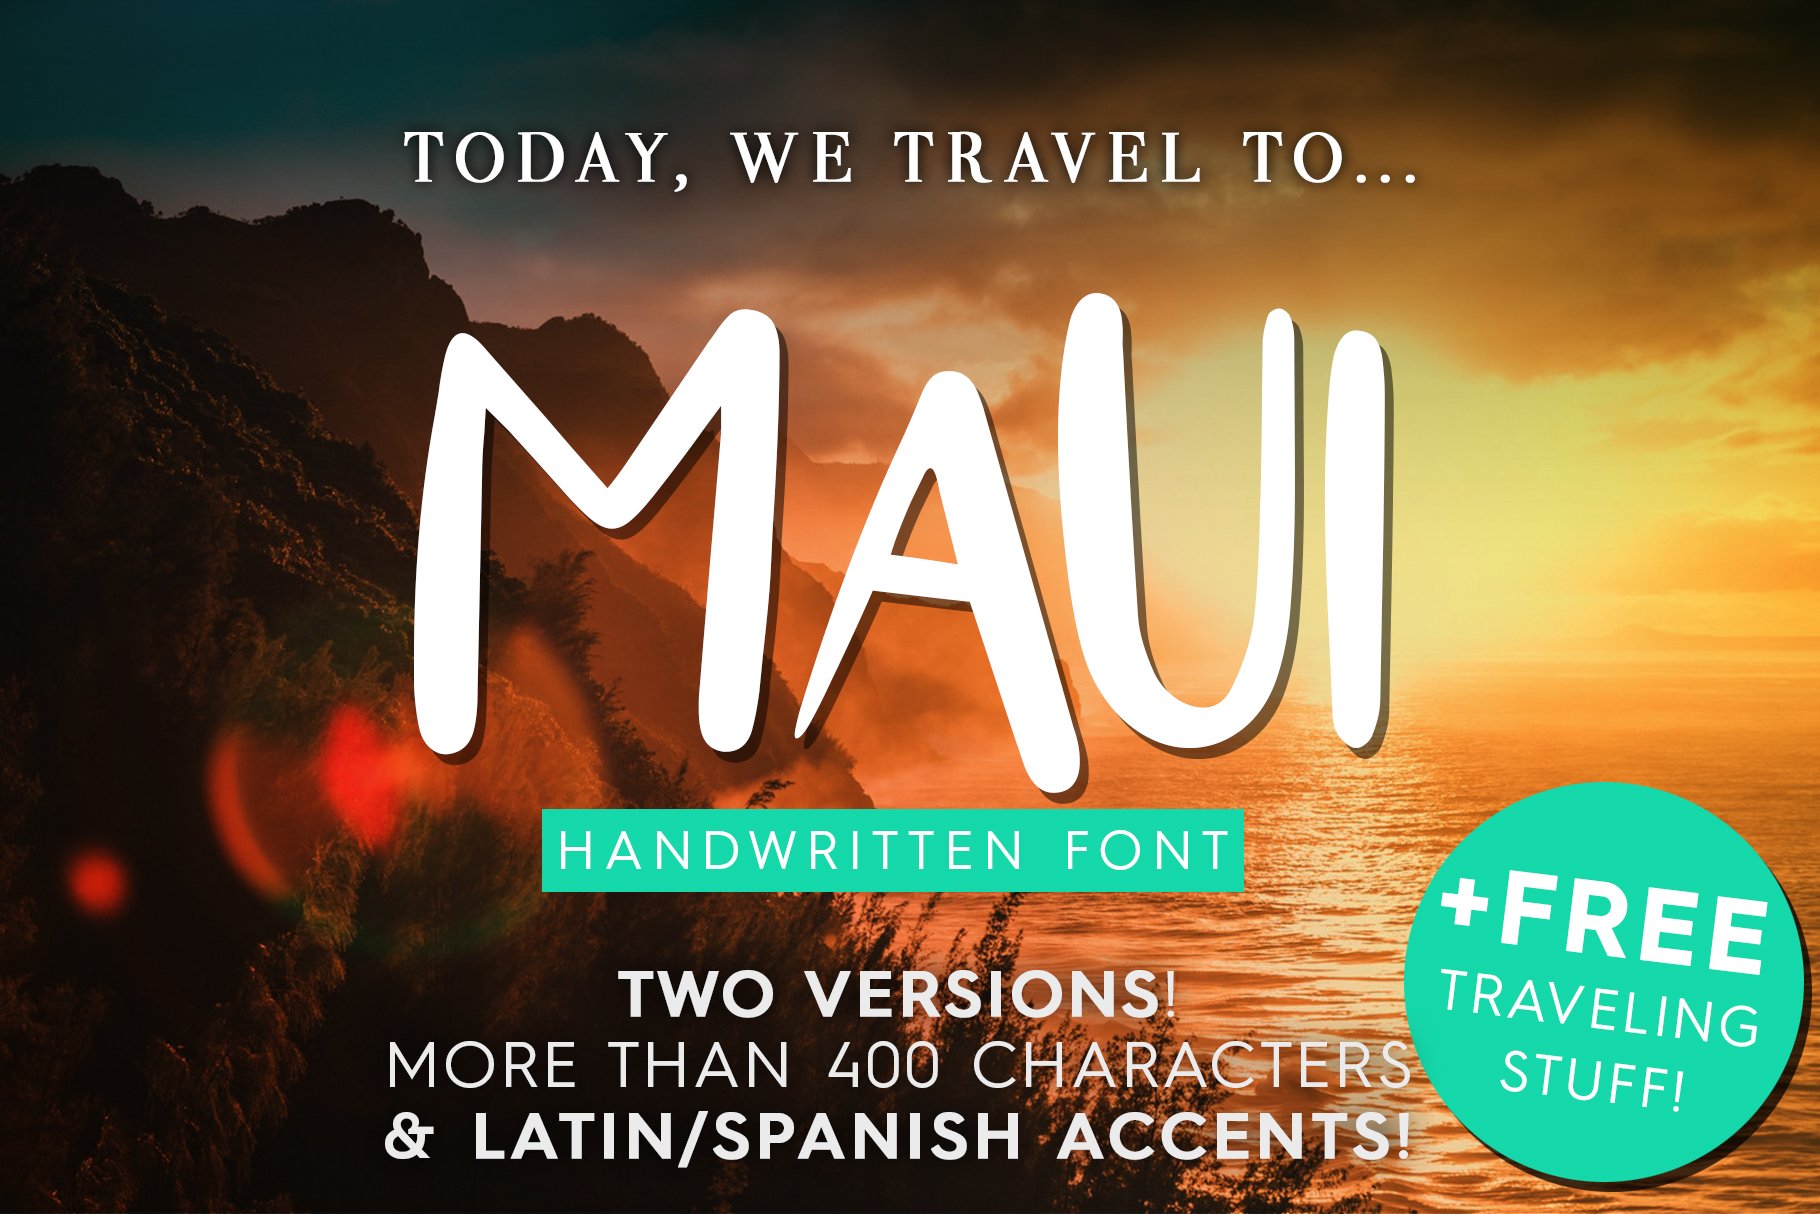 Maui - 2 Versions Handwritten Font cover image.